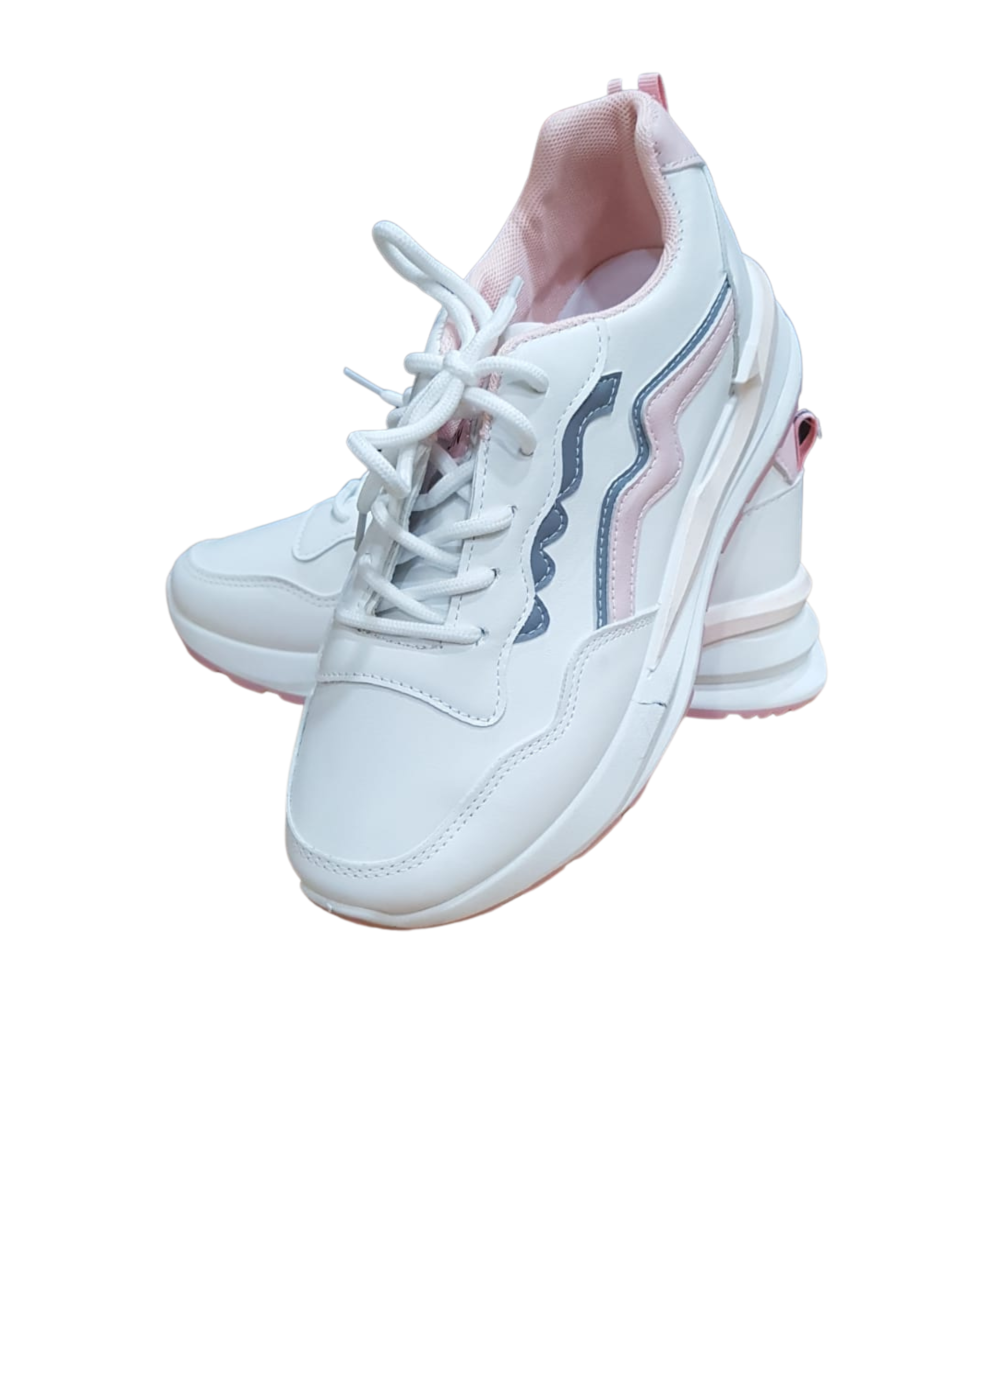 Stylish Sneakers For Women